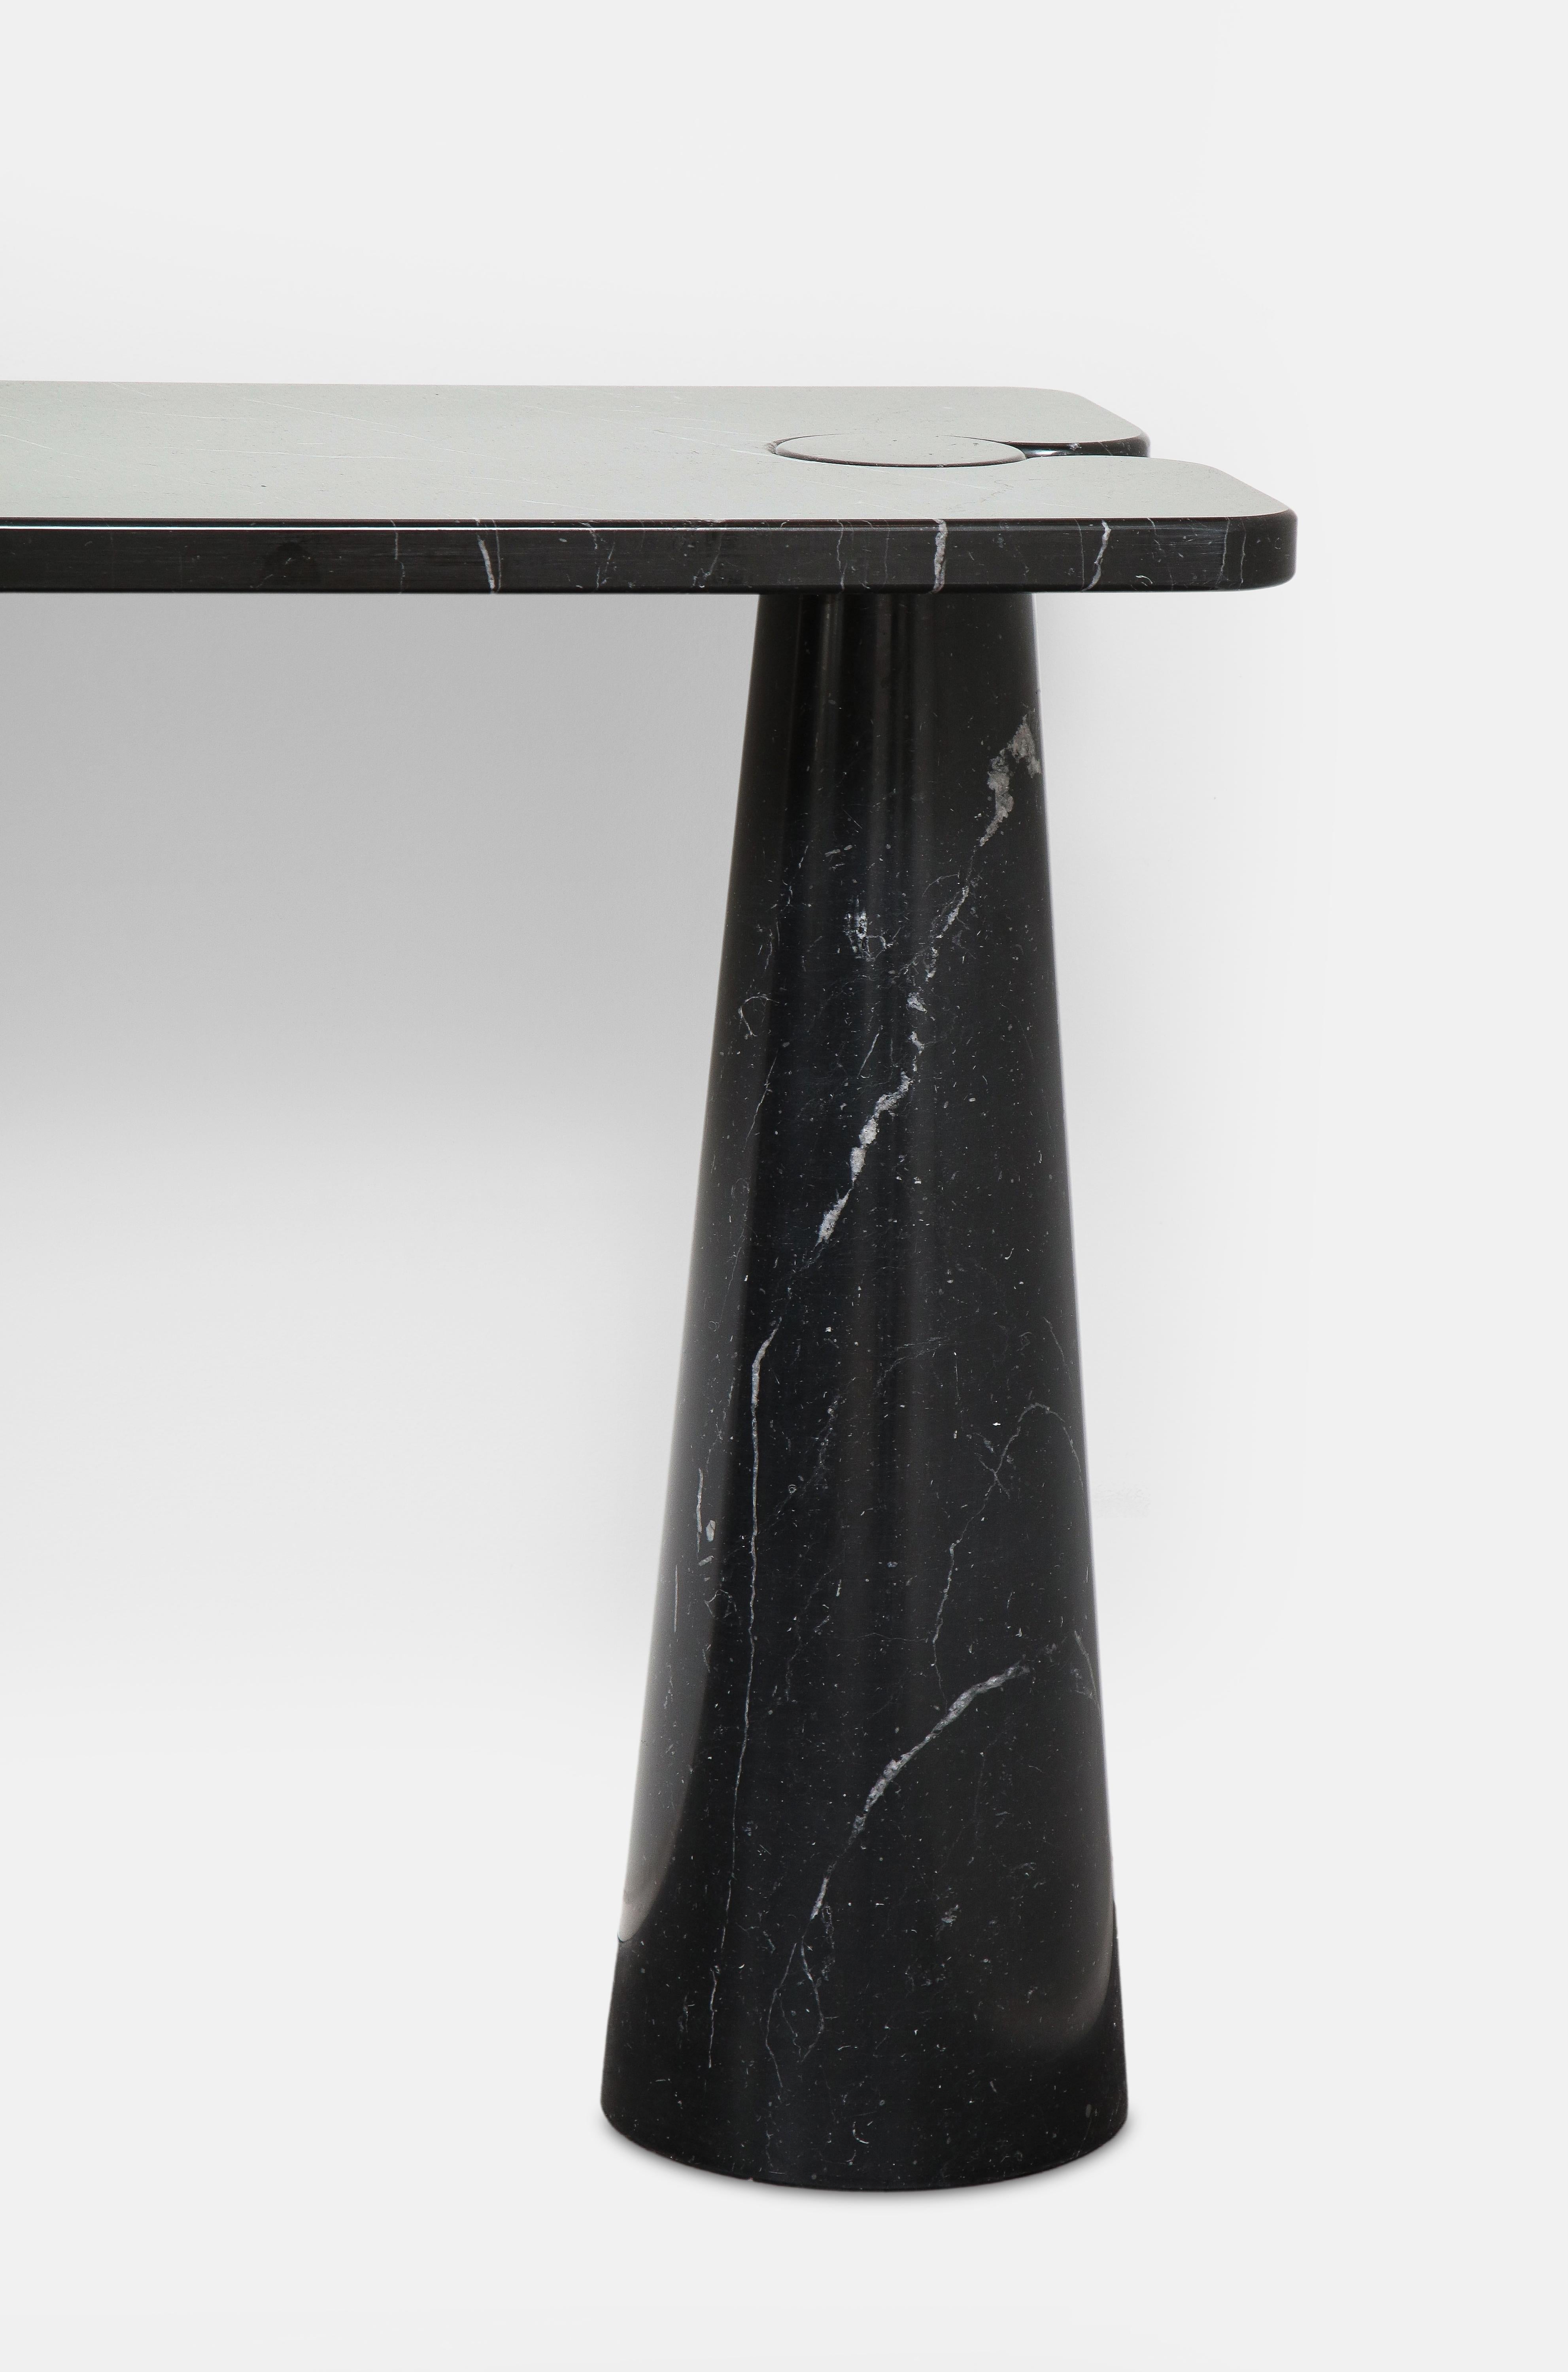 Polished Angelo Mangiarotti Black Marquina Marble Console with Skipper Label